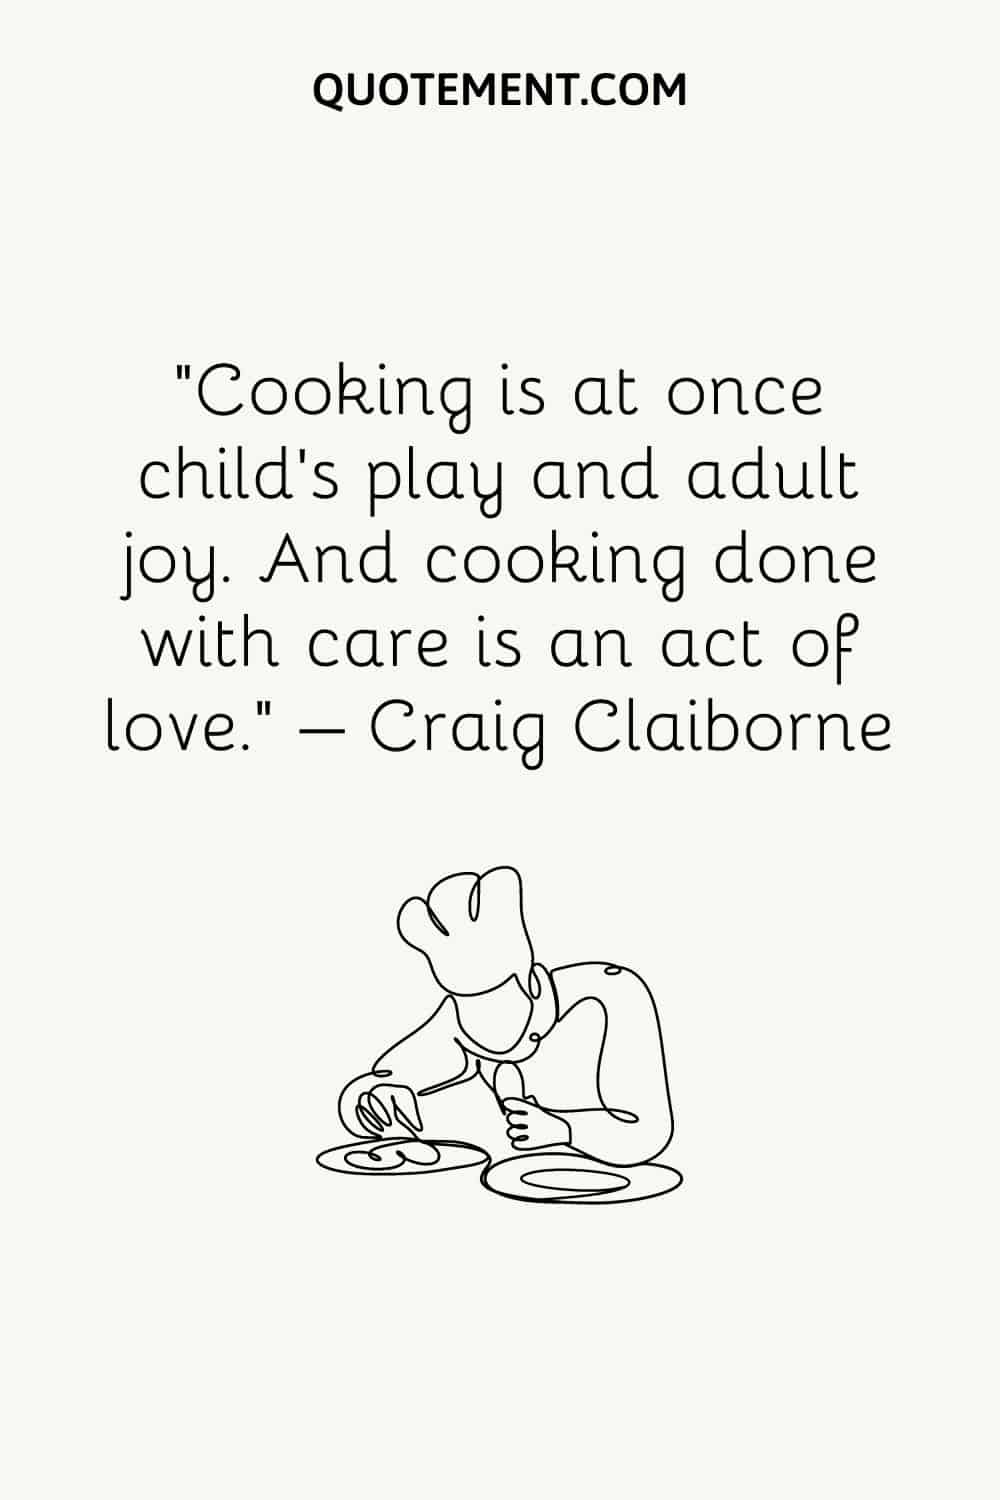 Cooking is at once child’s play and adult joy. And cooking done with care is an act of love